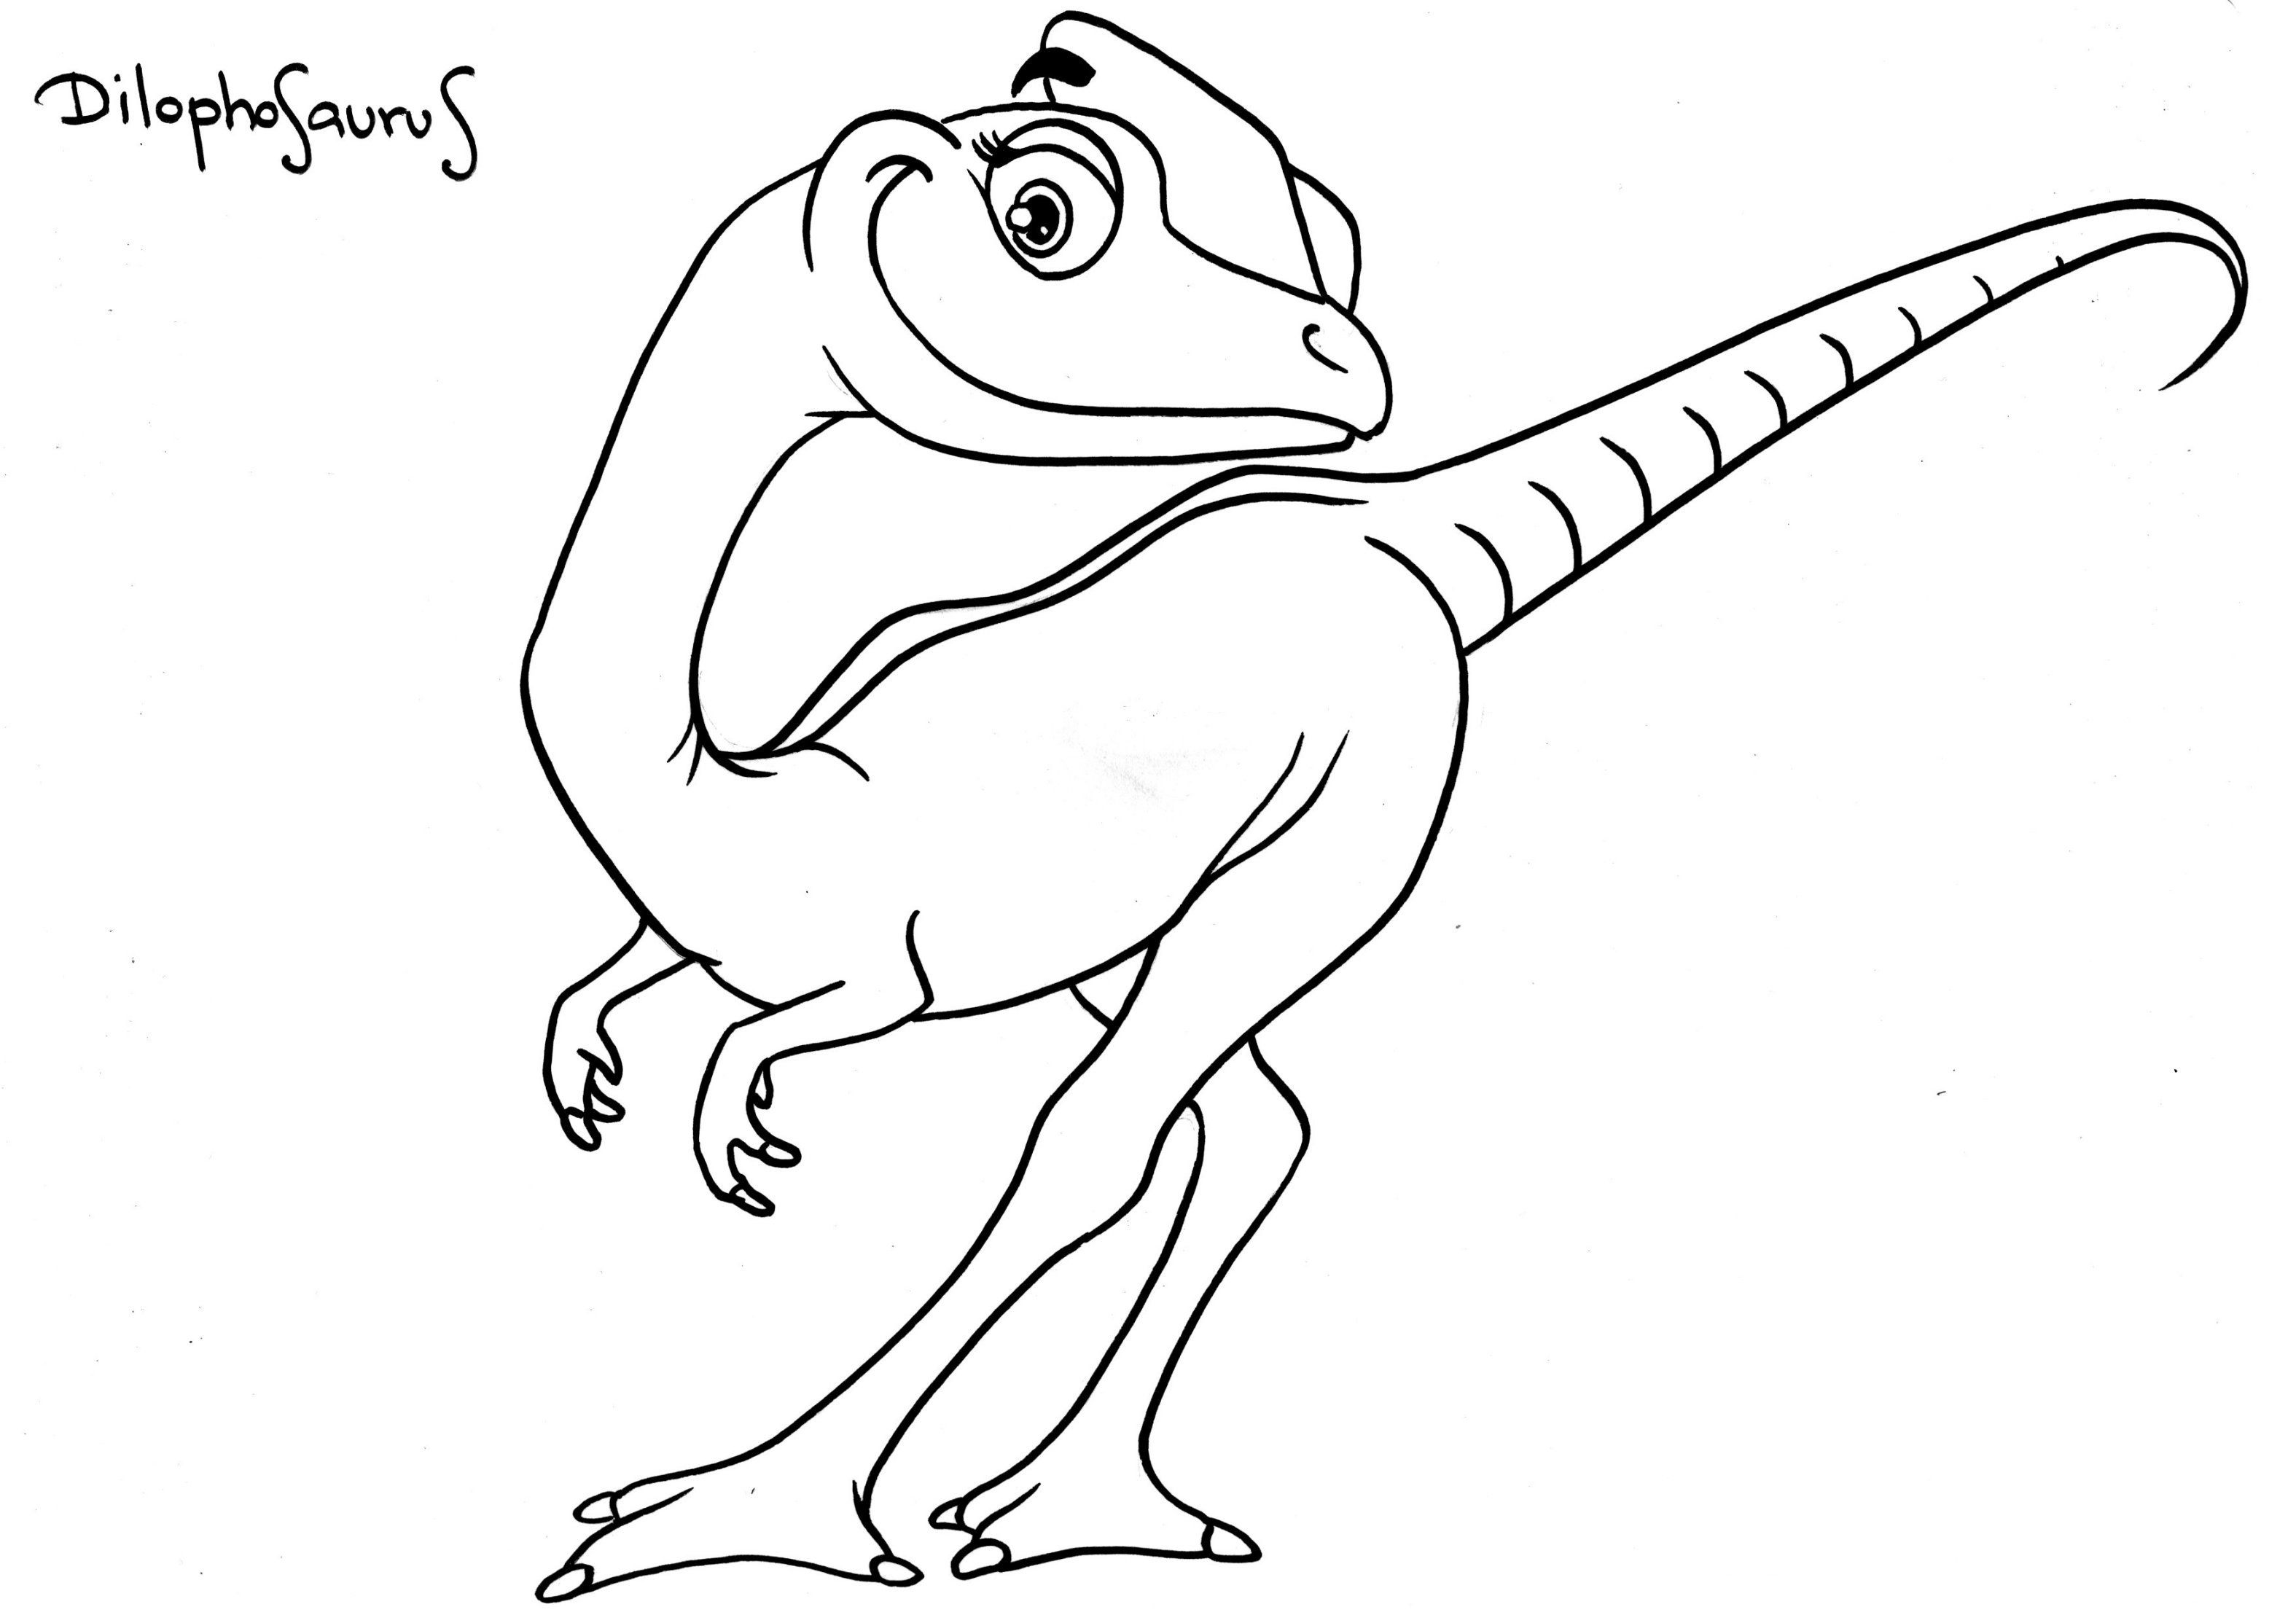 free dilophosaurus coloring pages